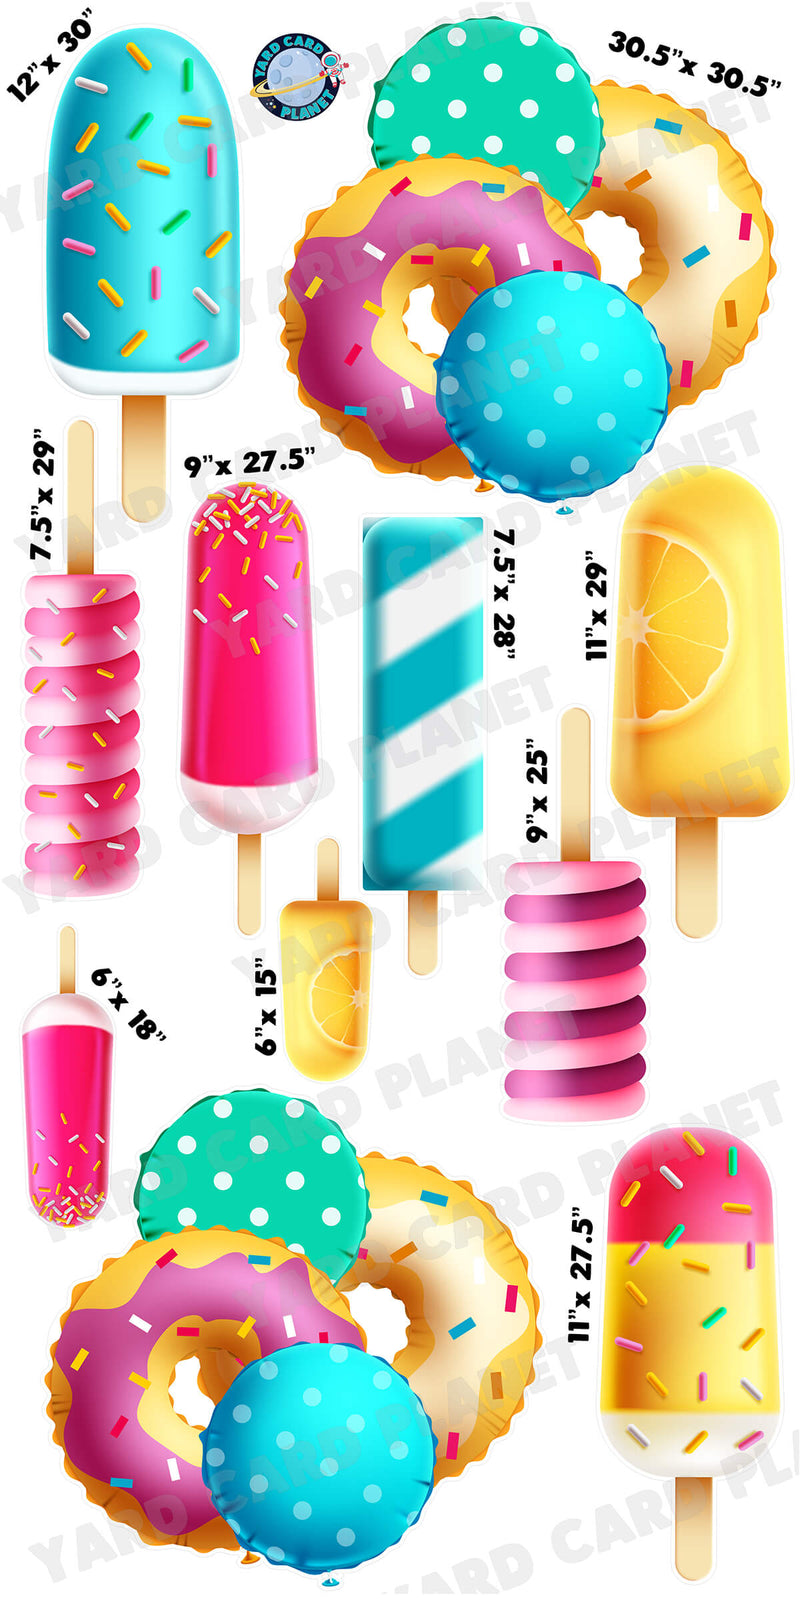 Popsicles and Sweet Treat Balloons Yard Card Flair Set